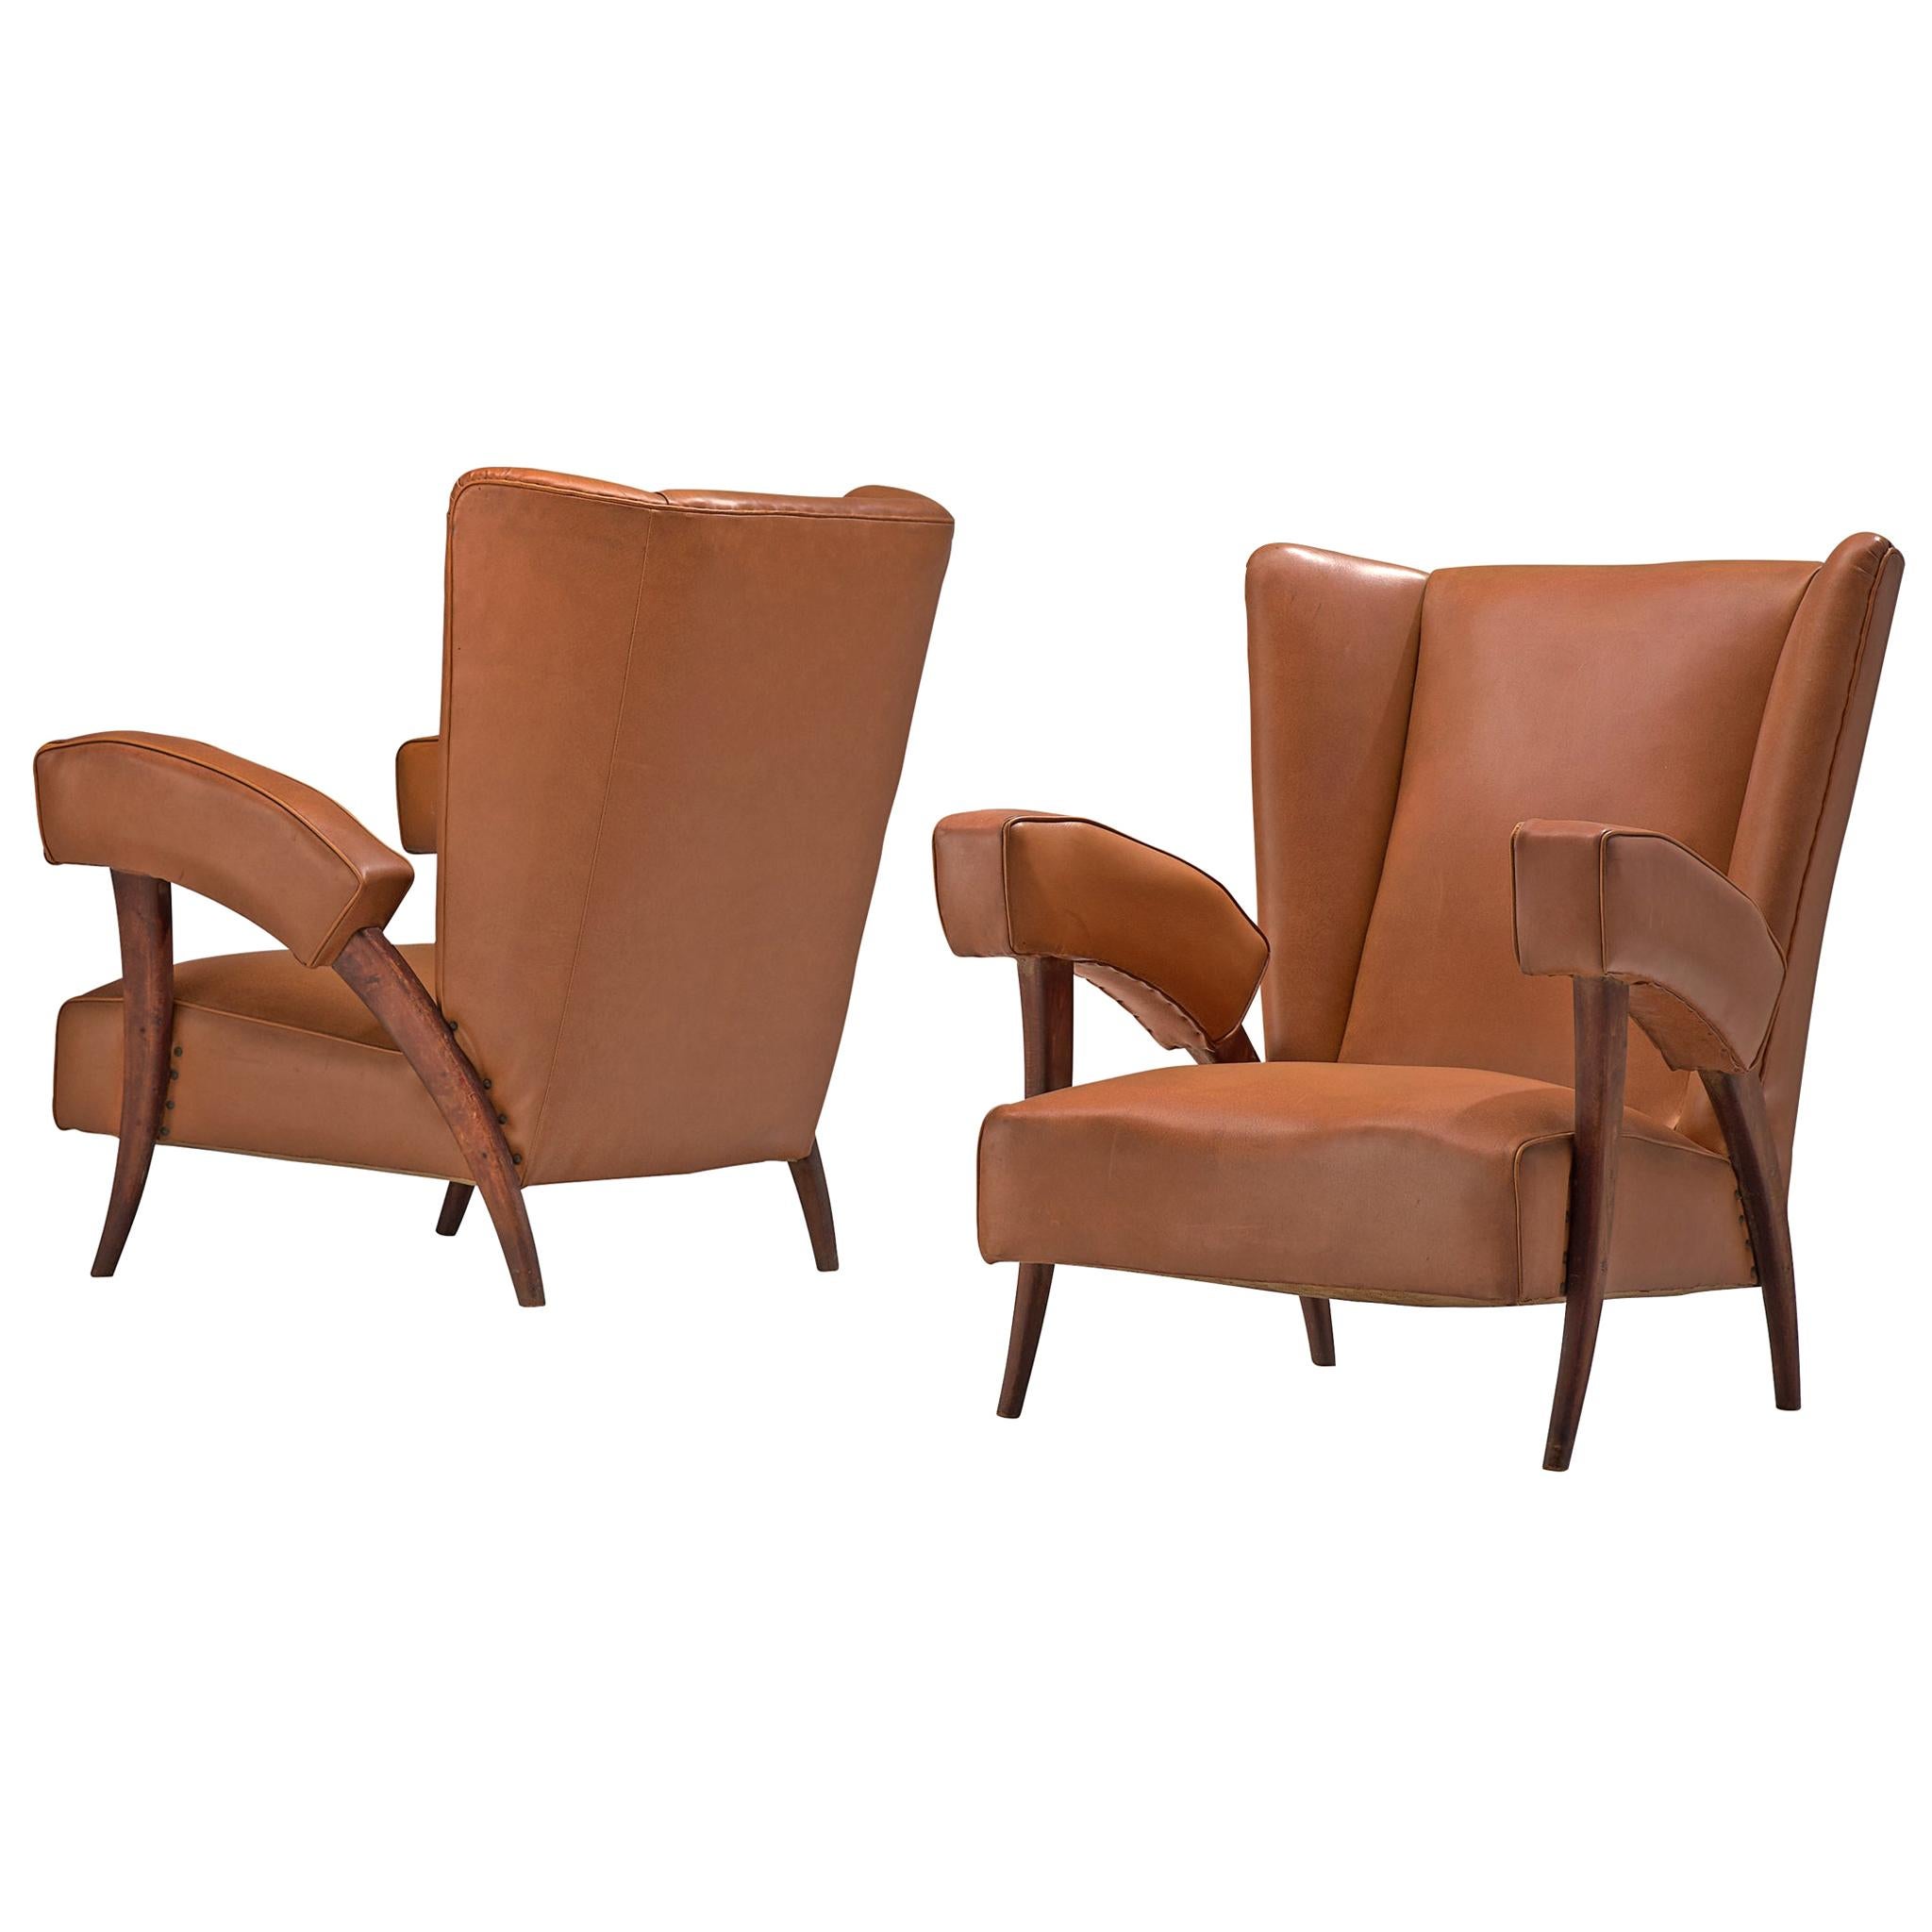 Italian Pair of Wingback Chairs with Characteristic Armrests